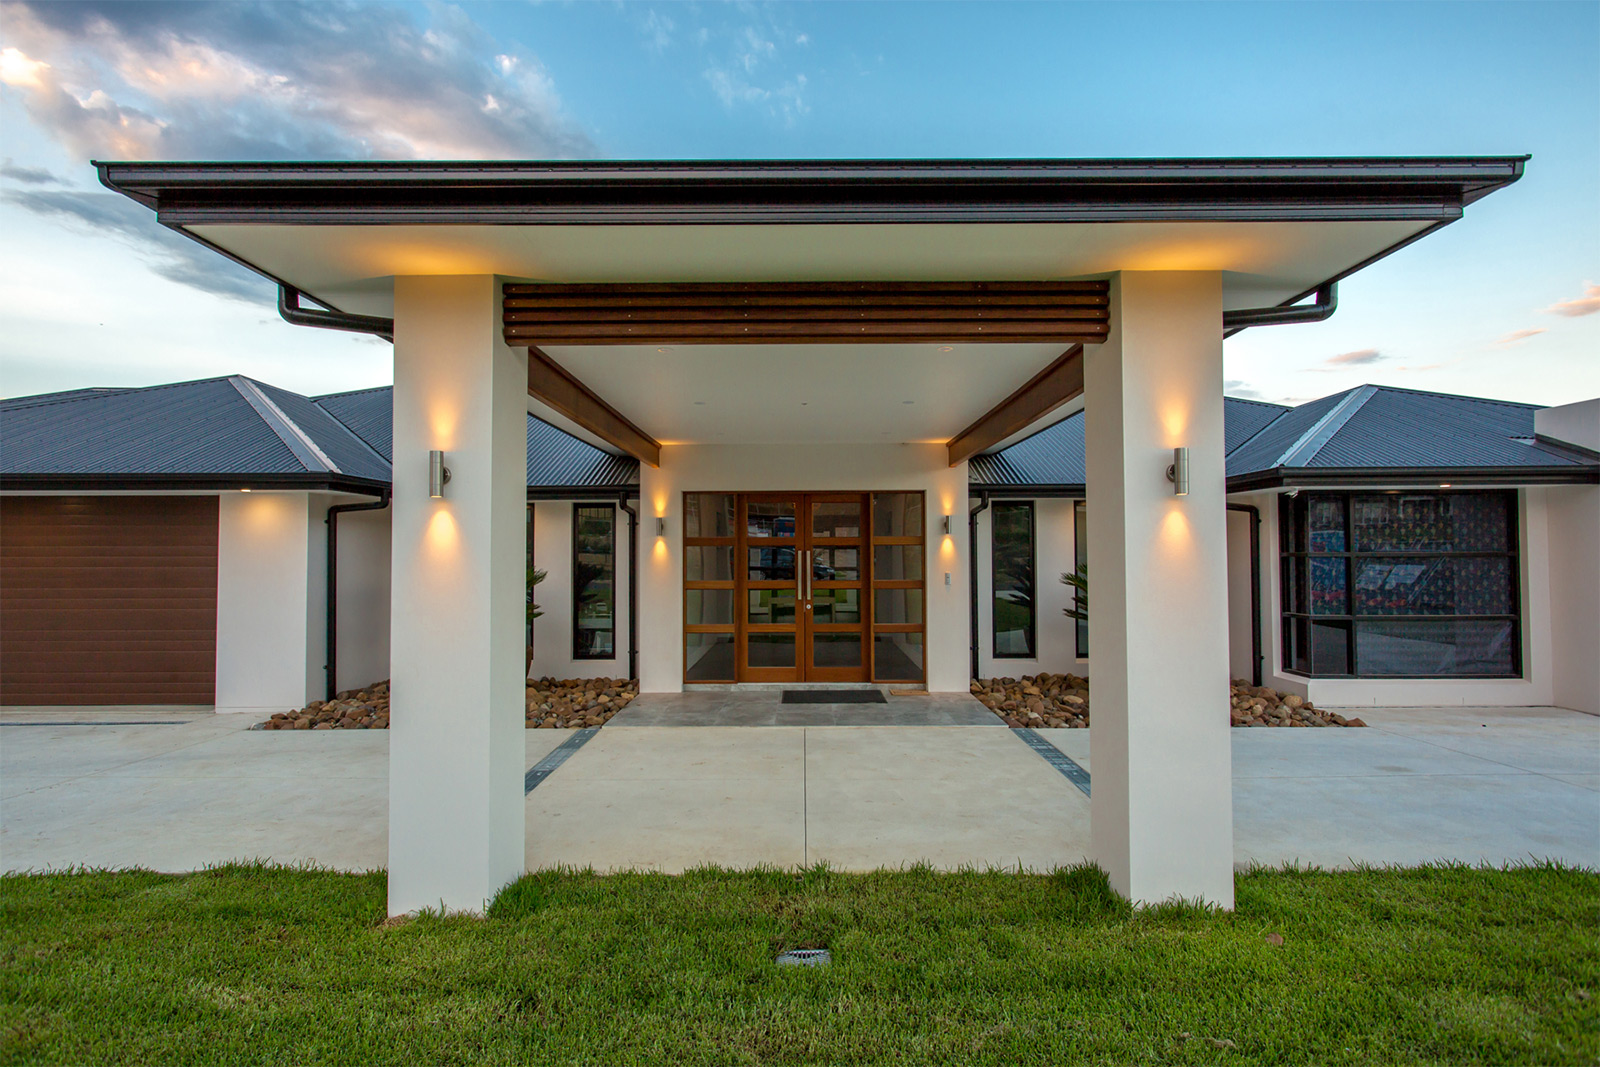 7 Things to consider when building a custom home